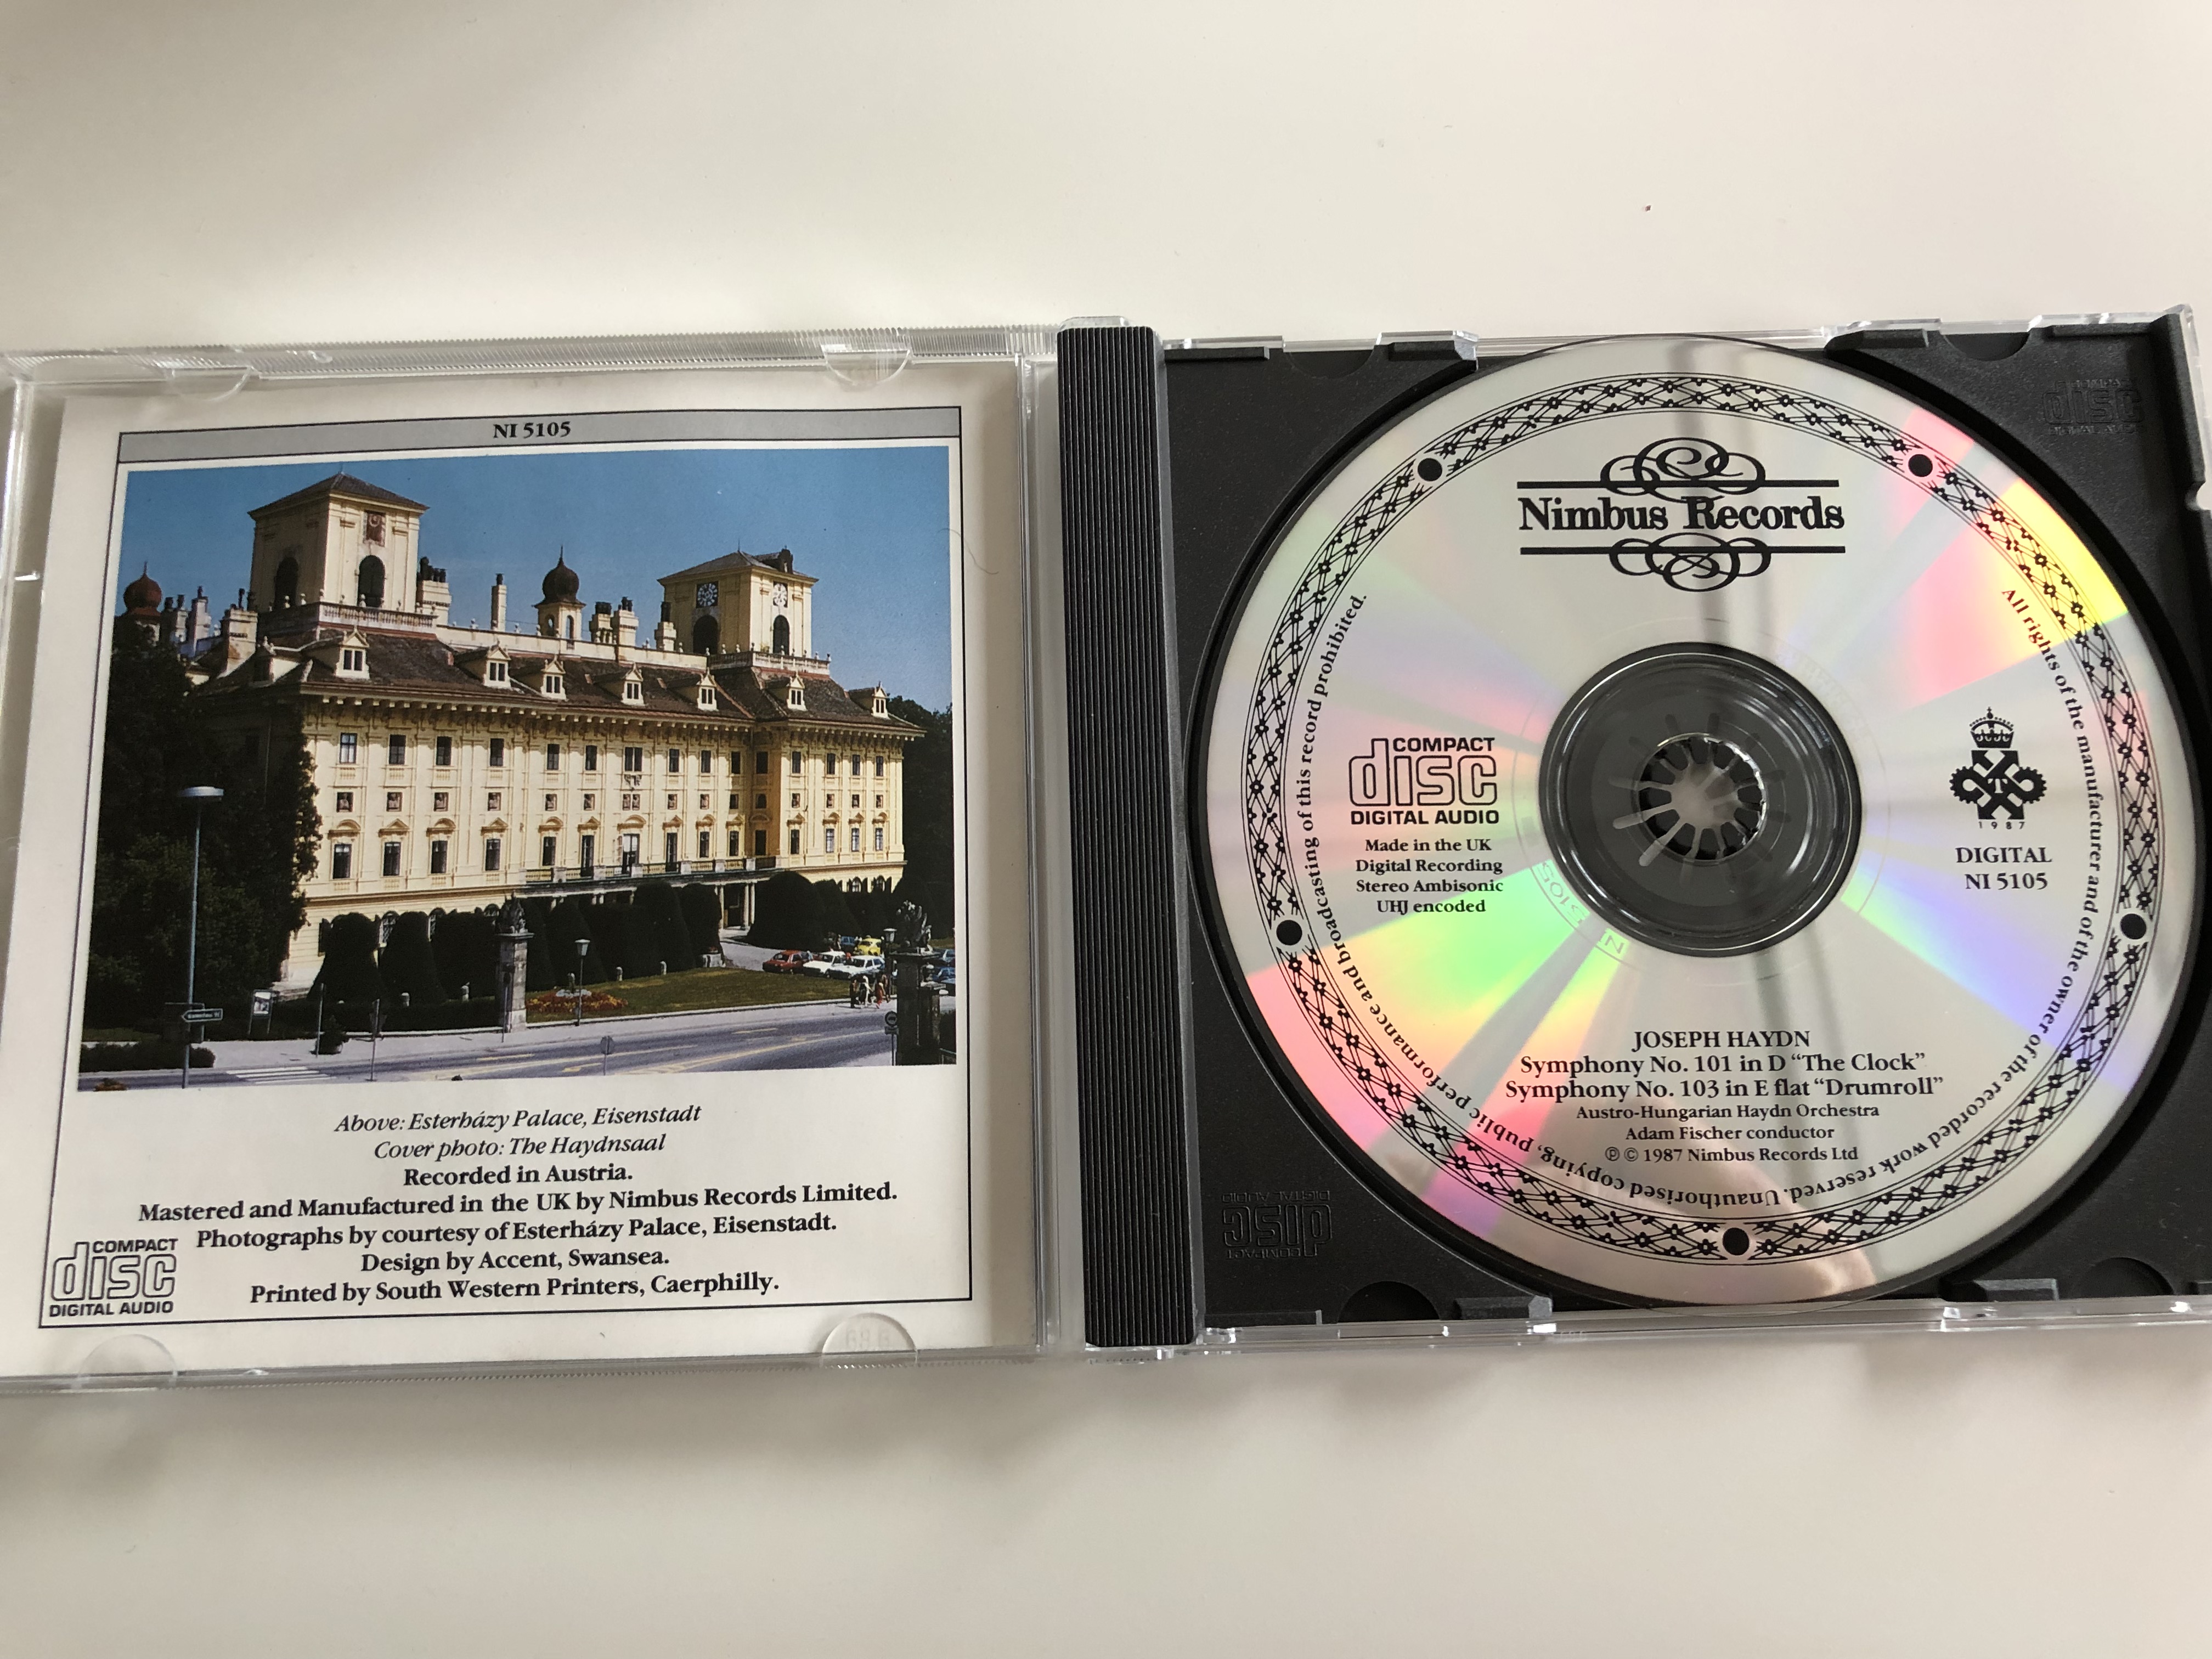 haydn-symphony-no.-101-in-d-the-clock-symphony-no.-103-in-e-flat-drumroll-austro-hungarian-haydn-orchestra-at-the-esterhazy-palace-eisenstadt-conductor-adam-fischer-nimbus-records-5-.jpg